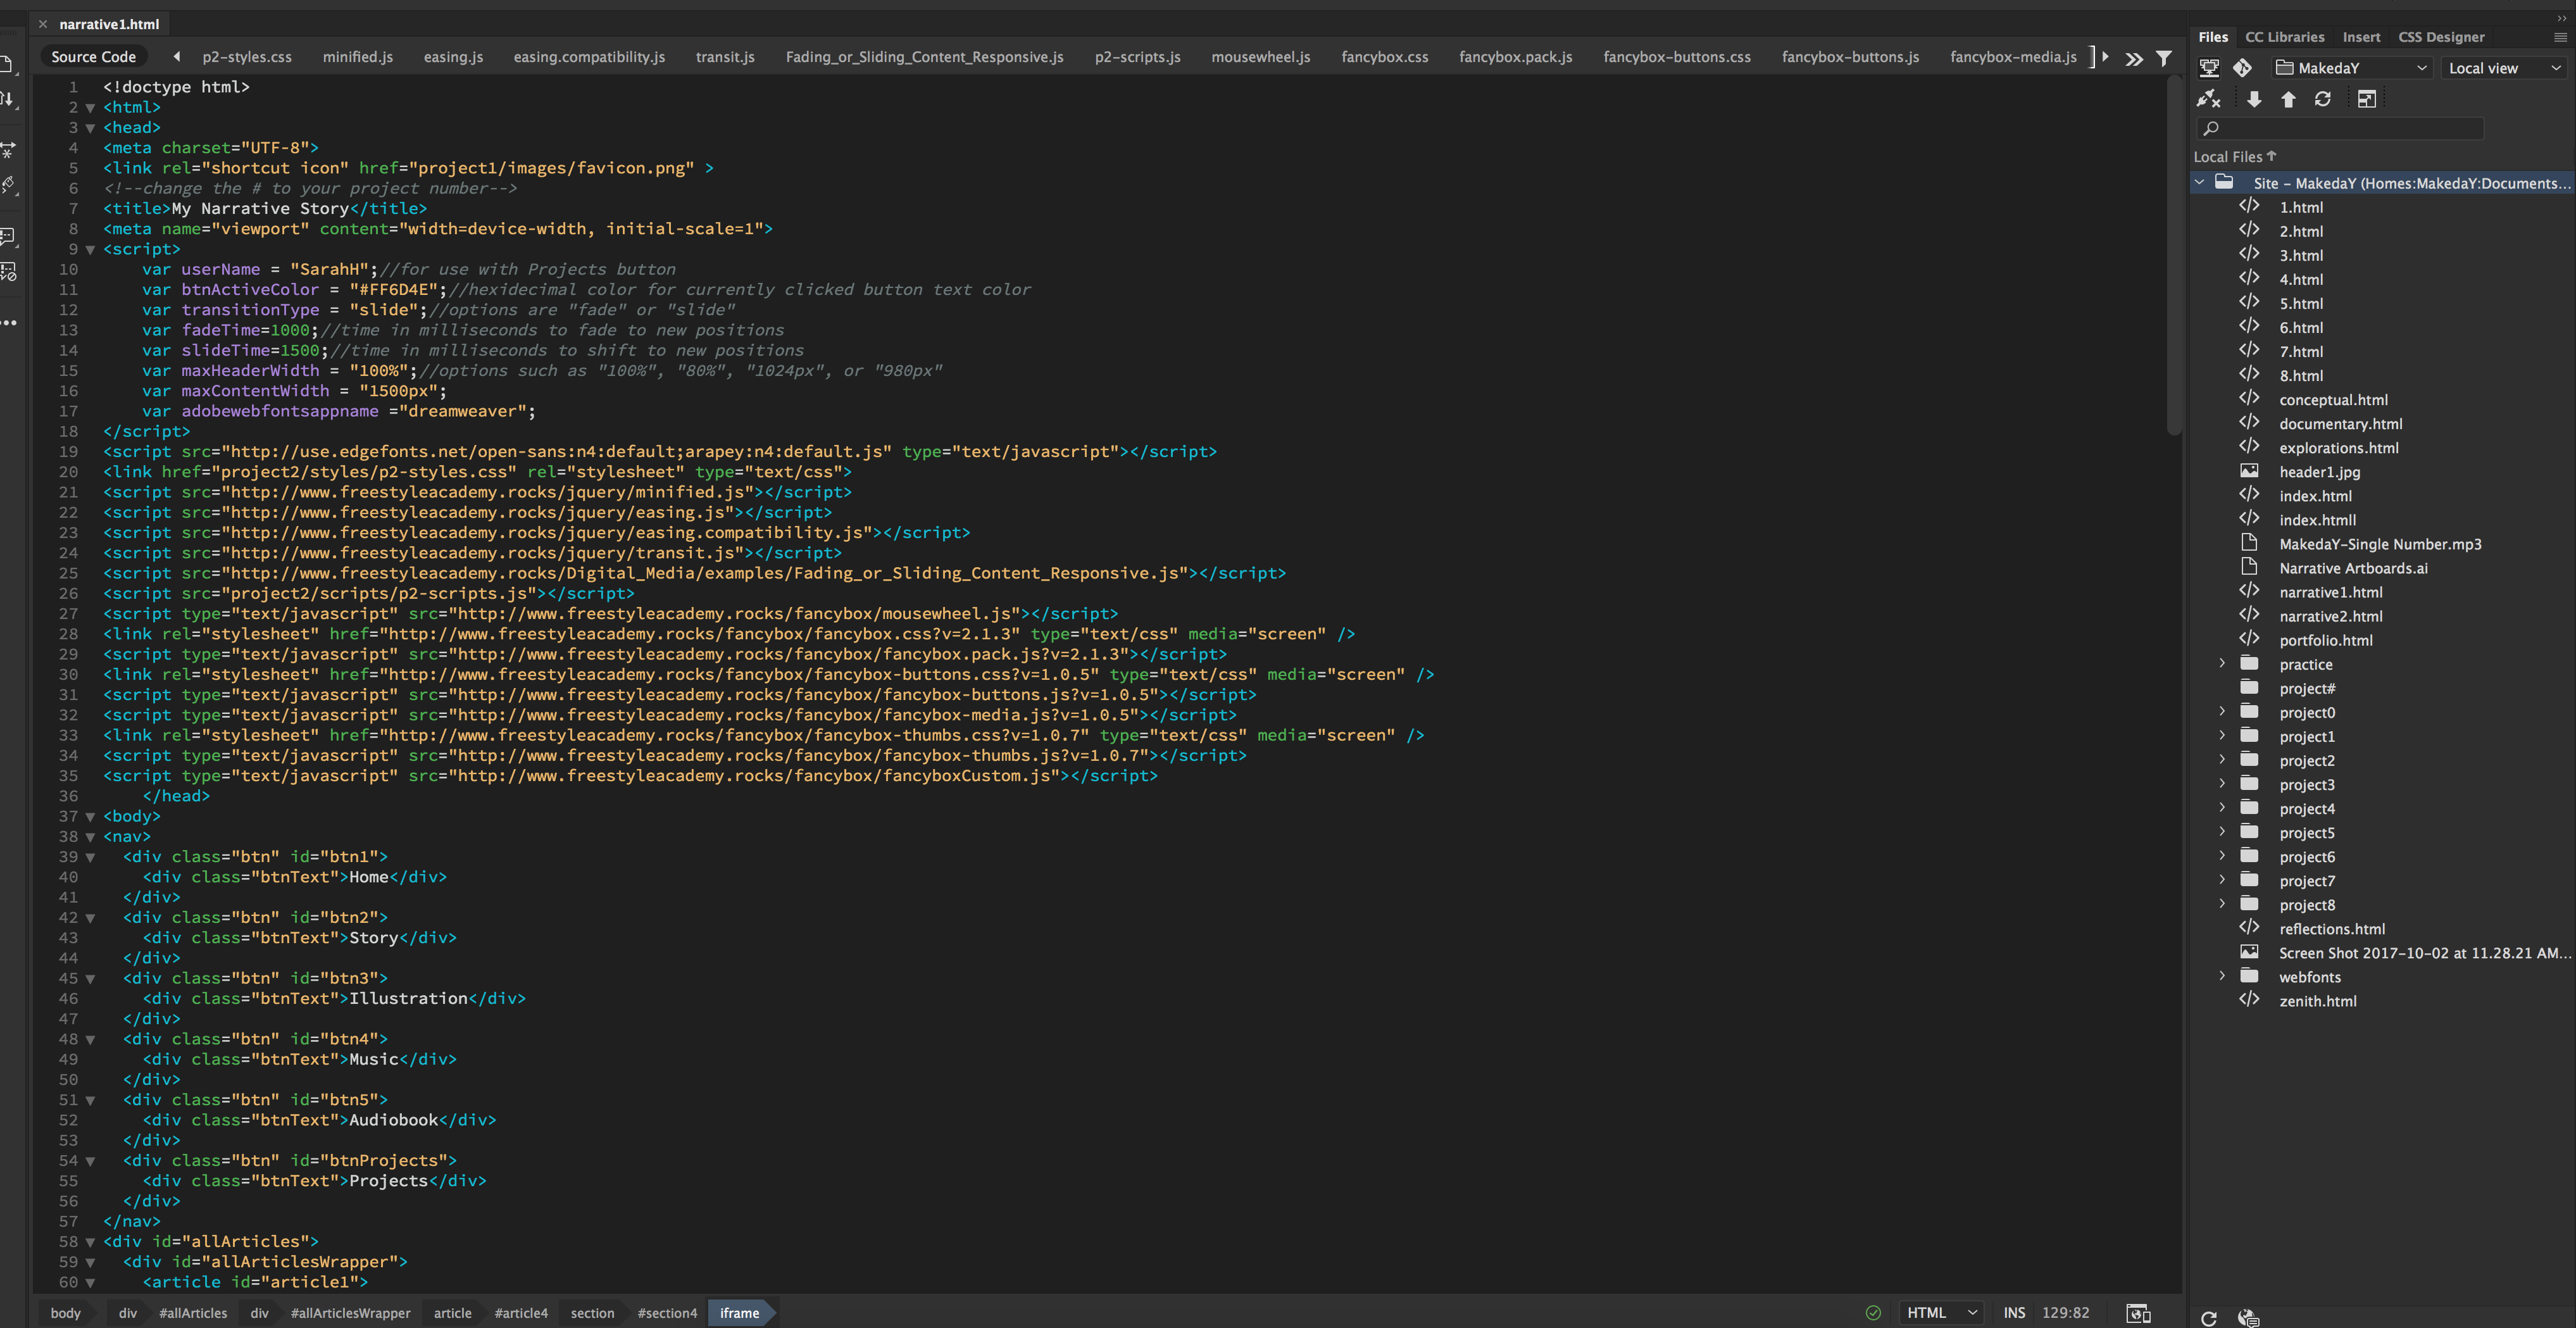 This is a screenshot of my website in production in Adobe Dreamweaver. 